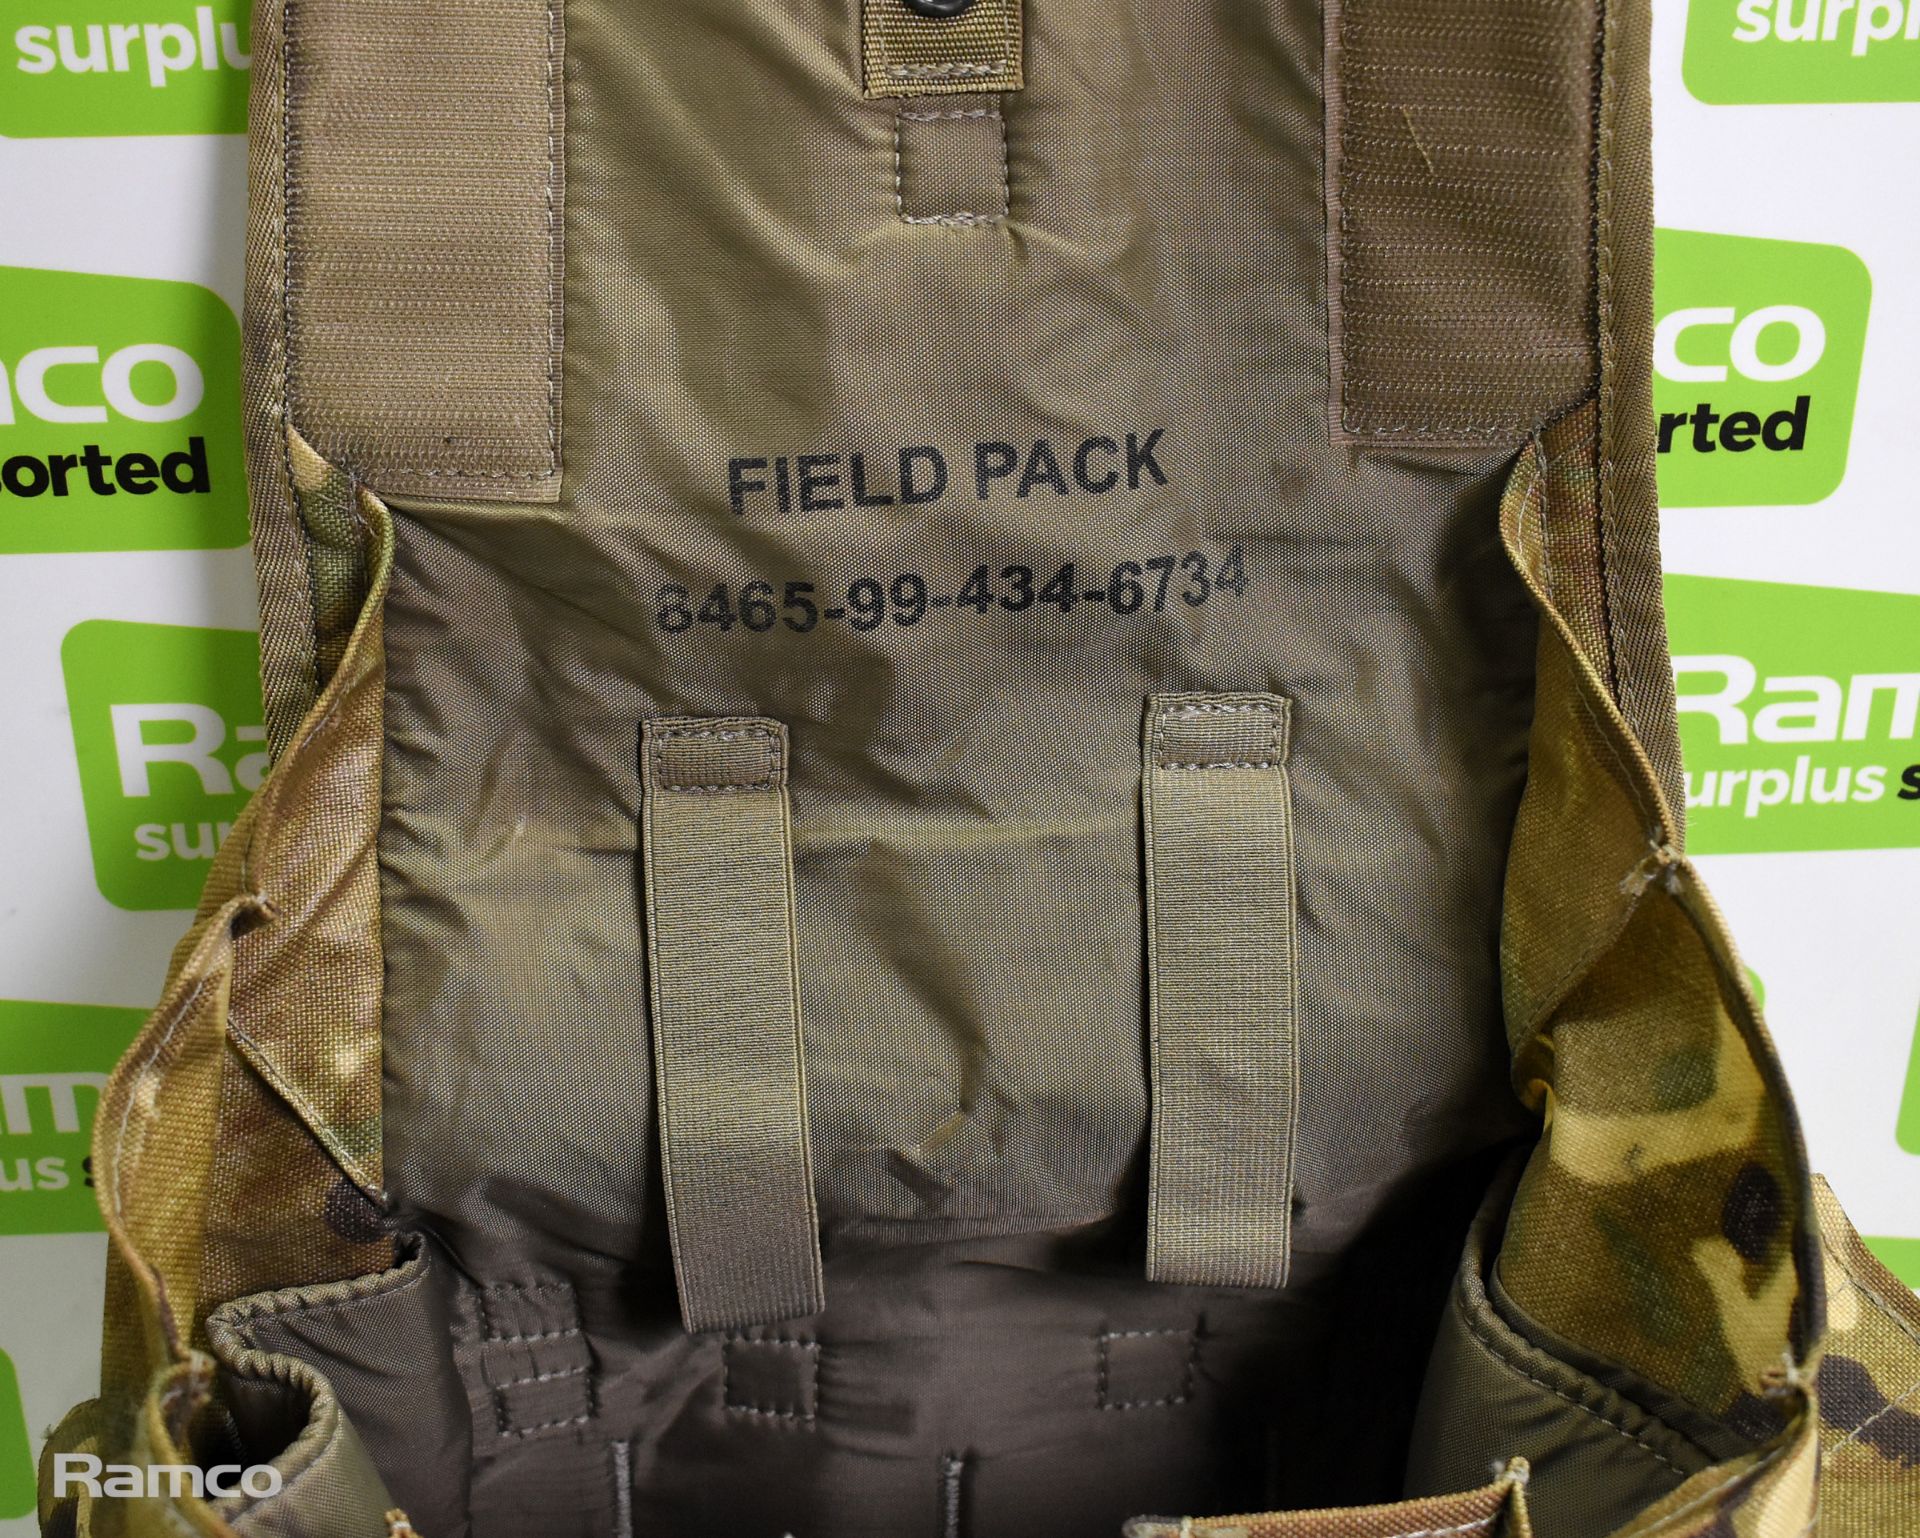 37x British Army MTP field packs - mixed grade - Image 4 of 6